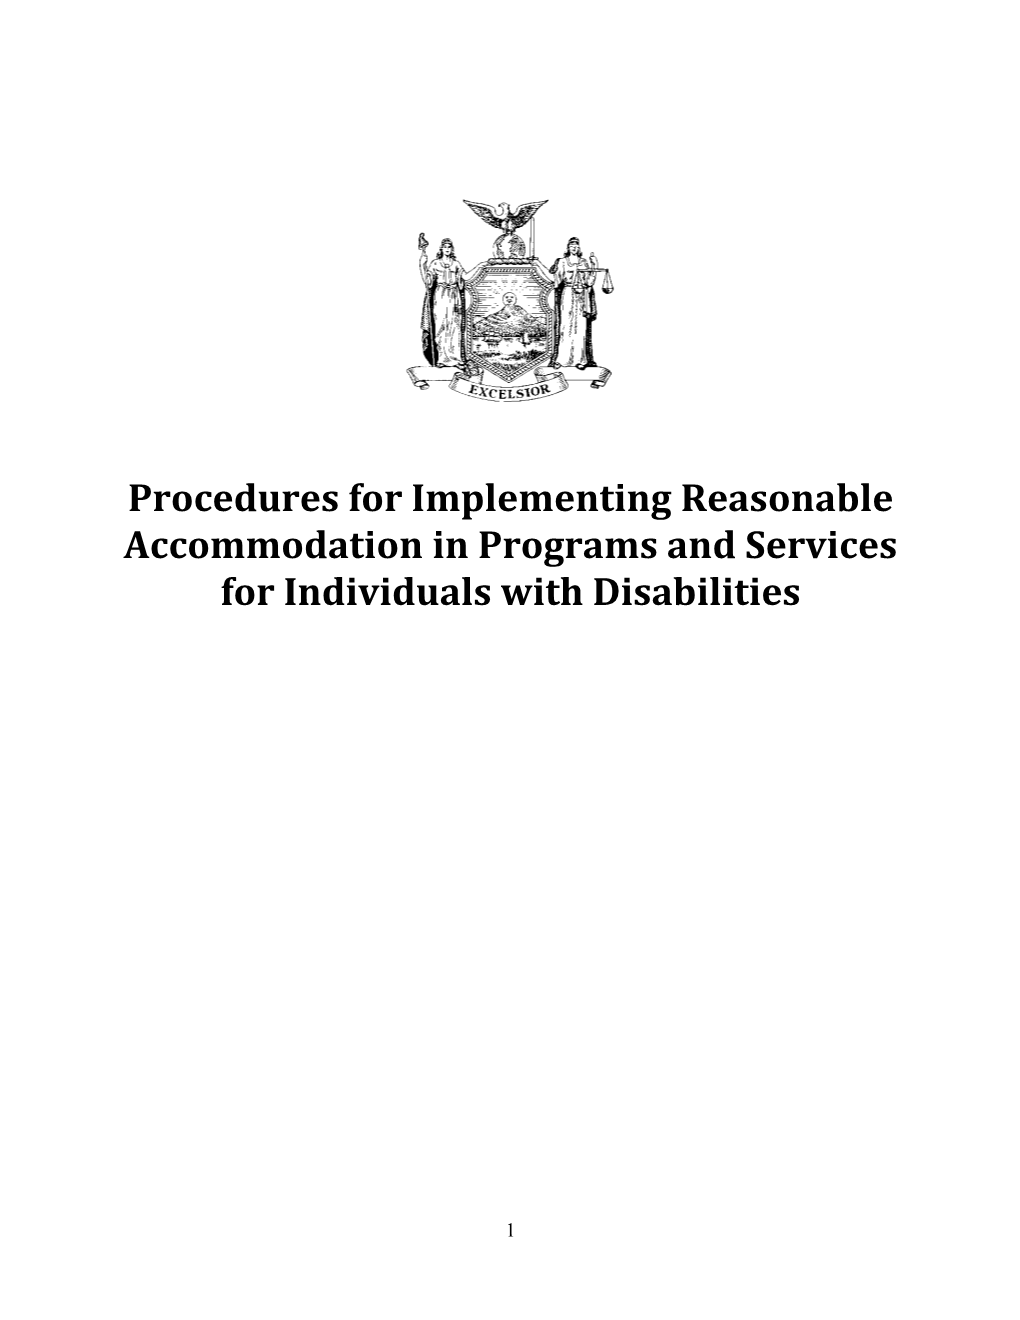 Procedures for Implementing Reasonable Accommodation in Programs and Services for Individuals with Disabilities